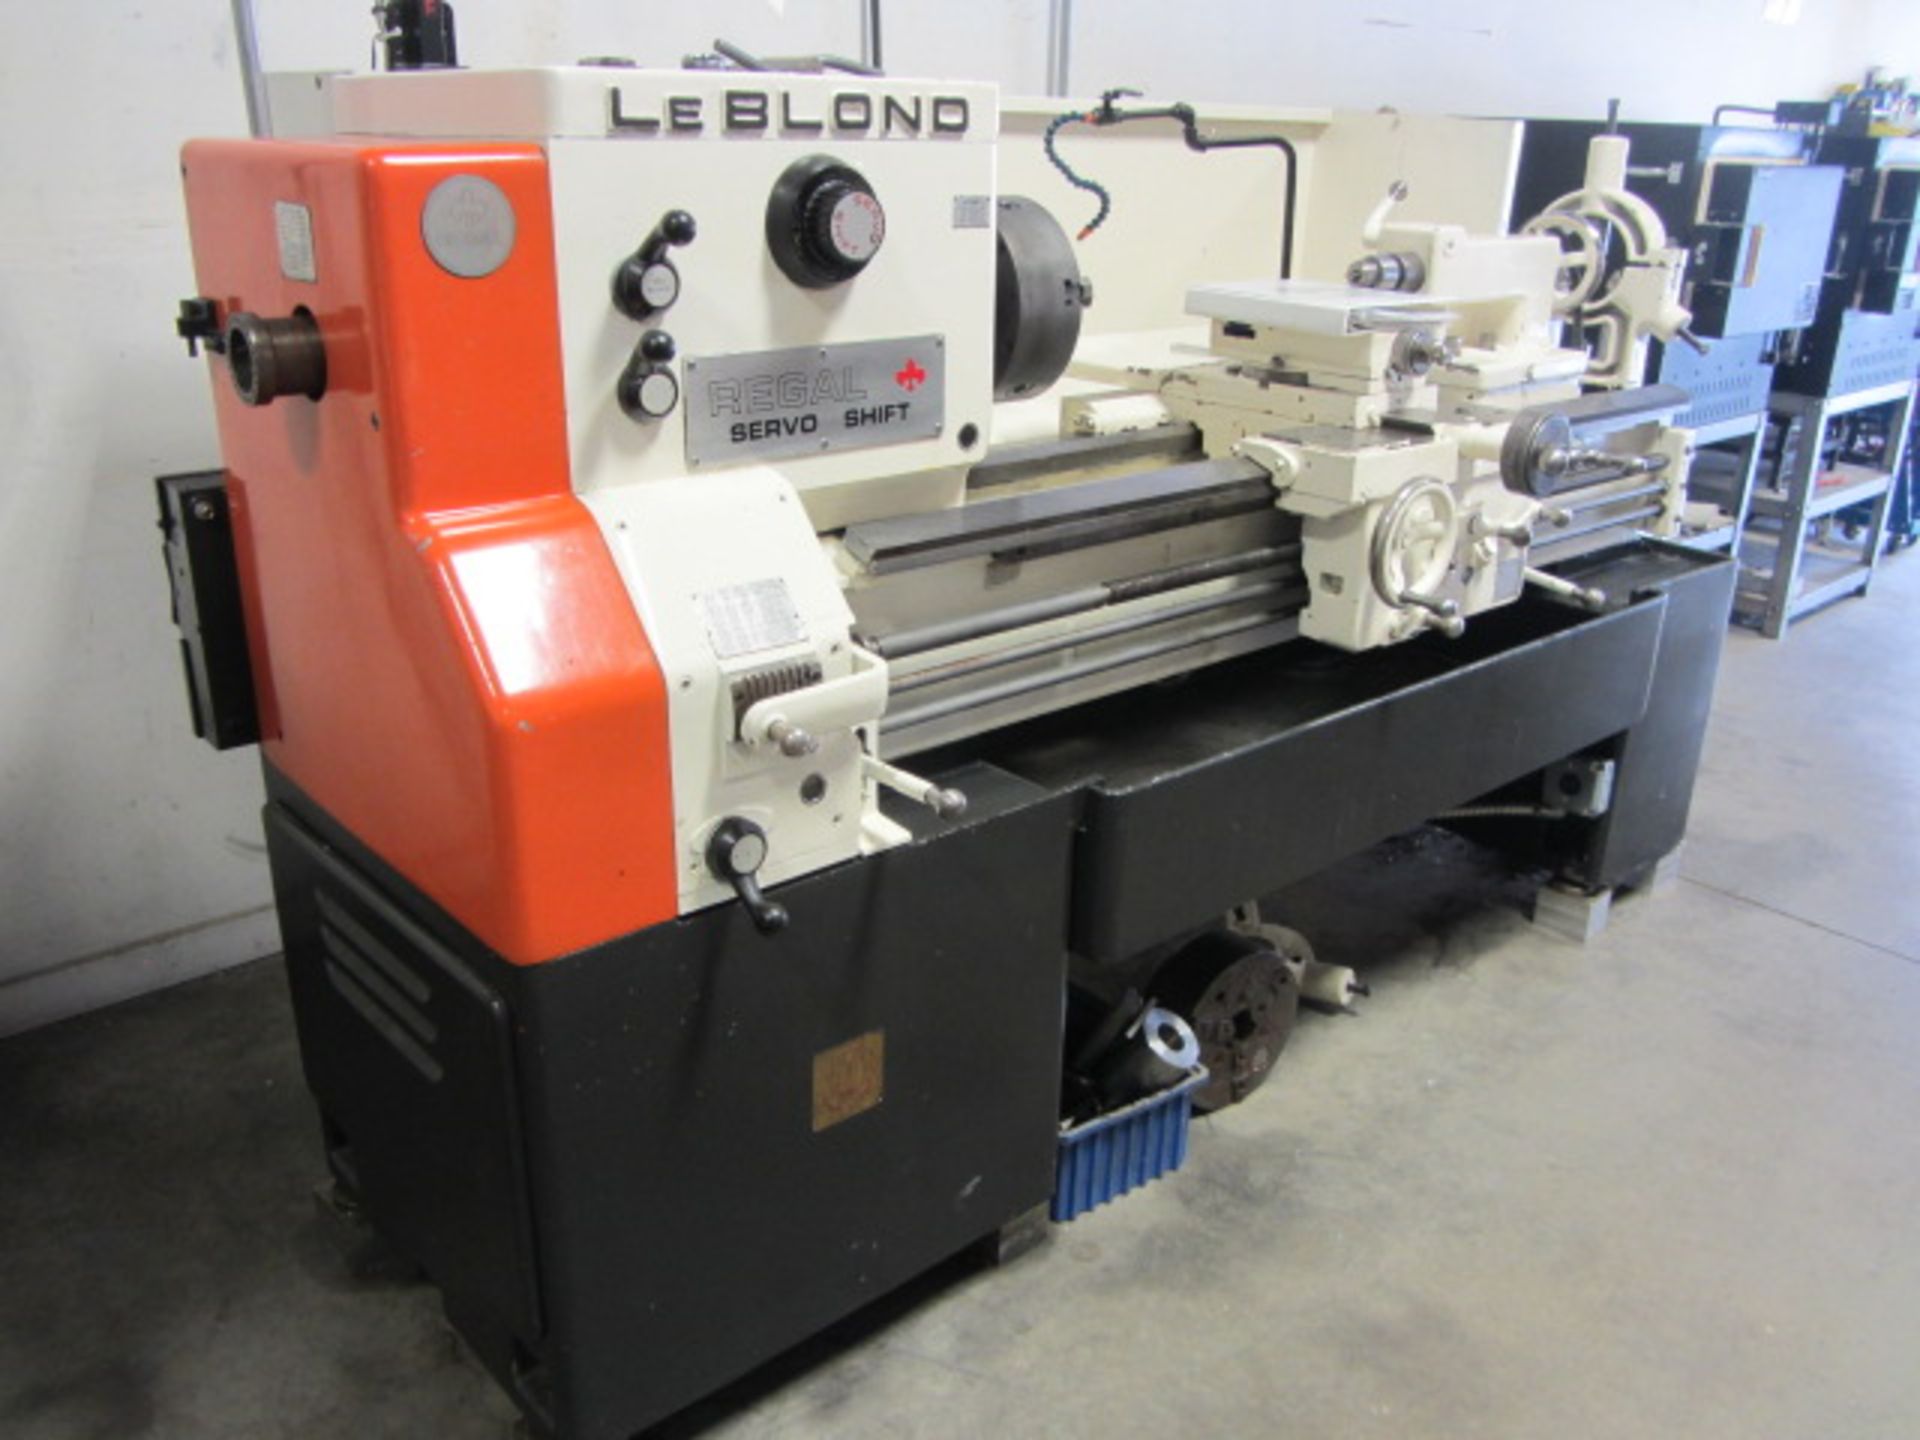 Leblond 18'' x 40'' Servo Shift Engine Lathe with 10'' 3-Jaw Chuck, Spindle Speeds to 1000 RPM, - Image 4 of 10